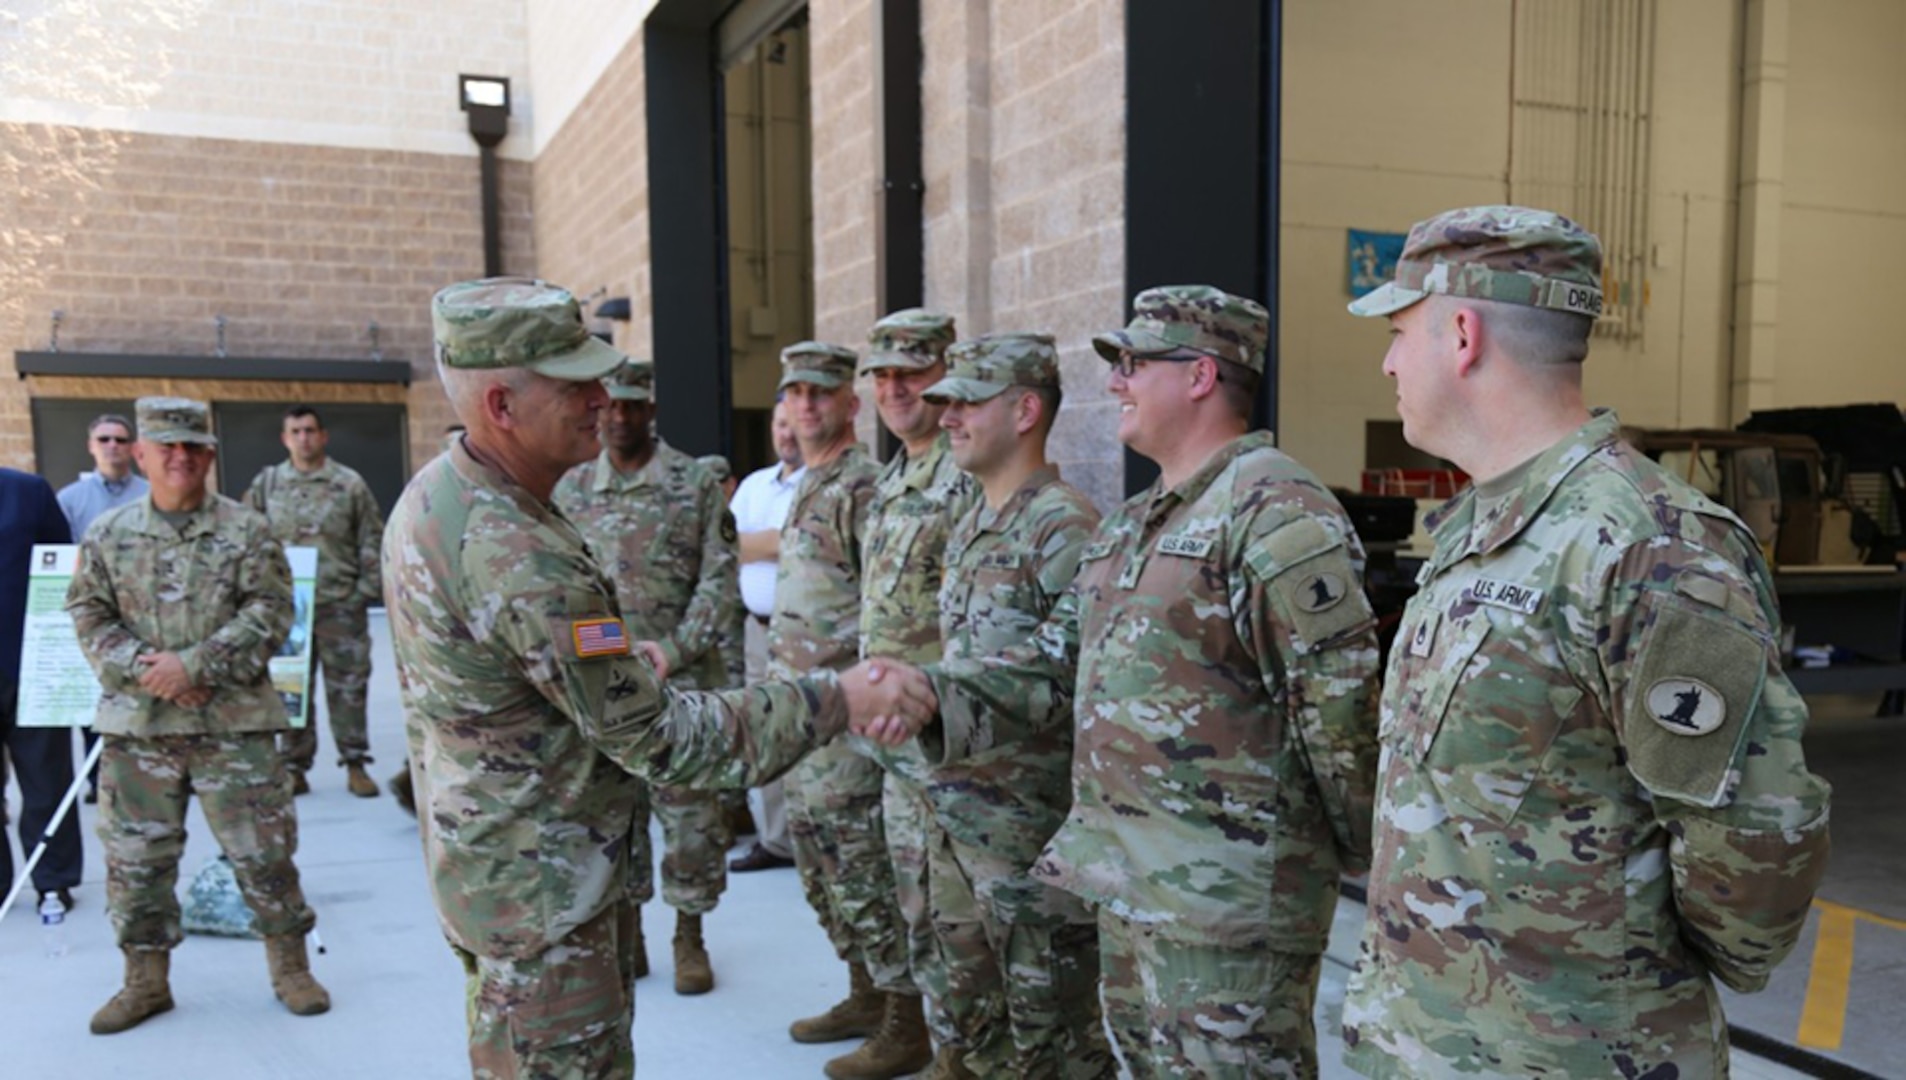 Maj. Gen. Anthony Potts, program executive officer for Command, Control, Communications-Tactical (PEO C3T), thanks and provides a PEO C3T coin to Soldiers from the Delaware Army National Guard 198th Expeditionary Signal-Battalion for their extraordinary efforts during the new equipment training and fielding for the modernized ESB-E equipment set, in New Castle, Delaware, on August 9, 2022.